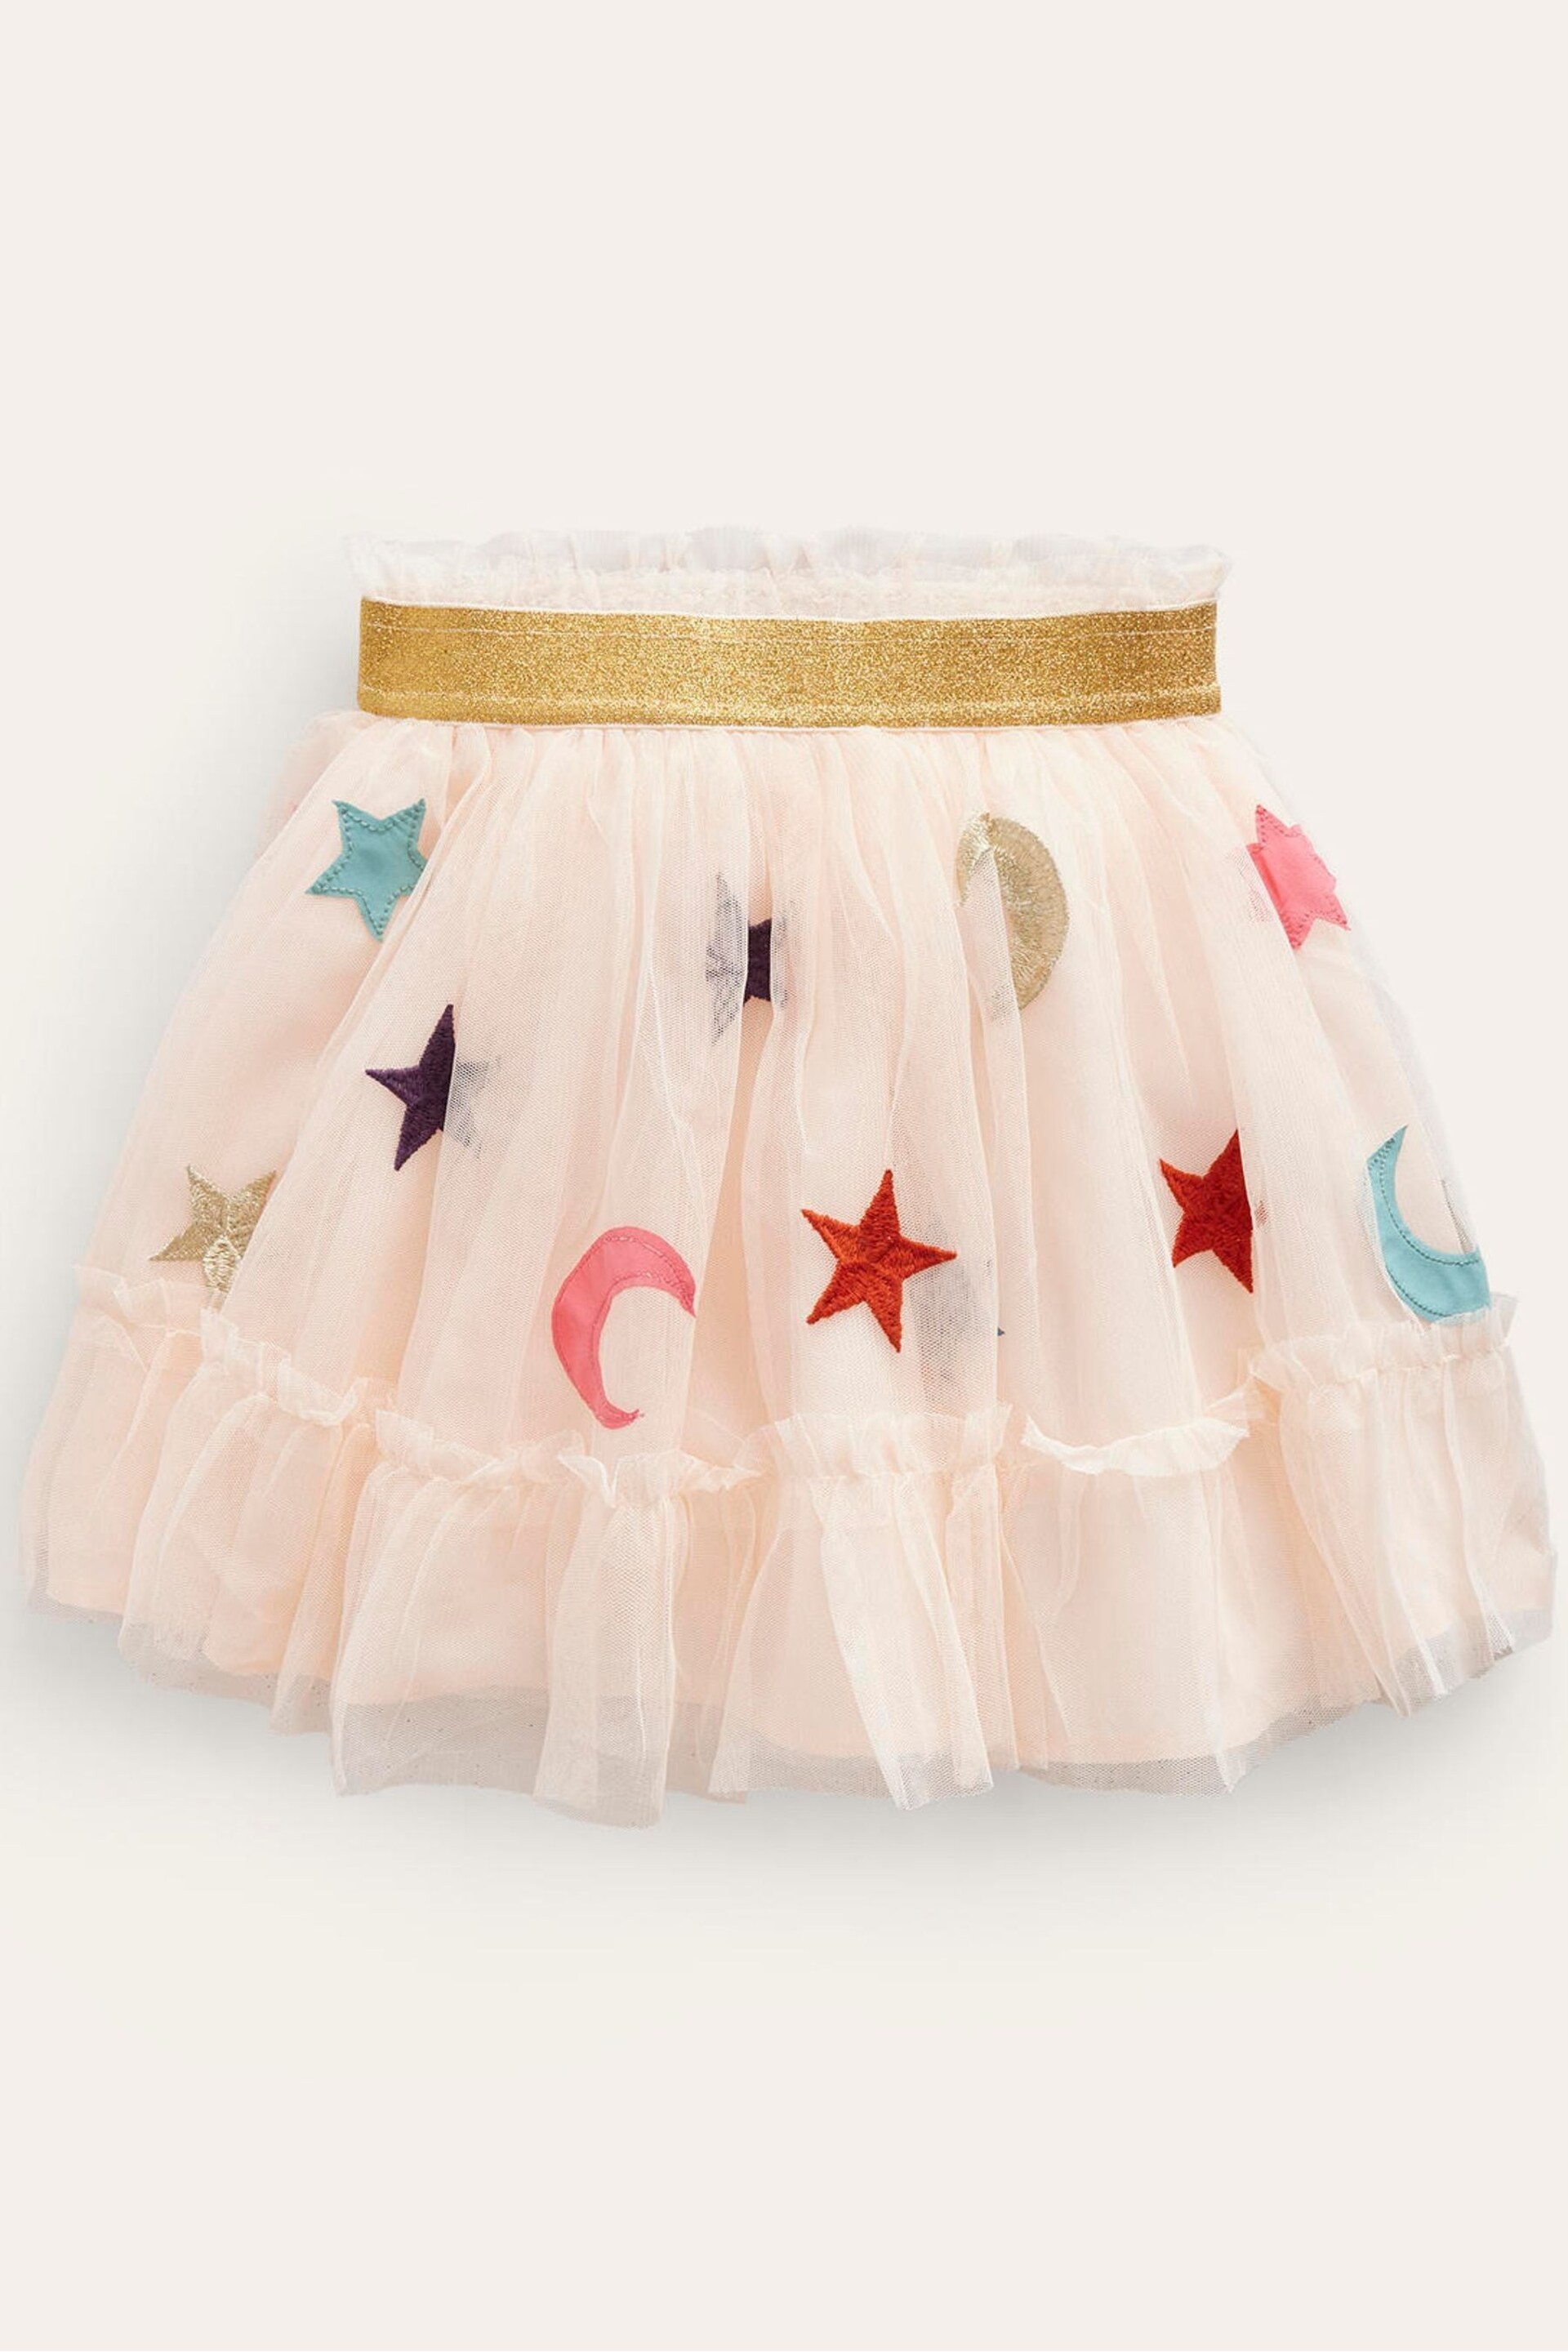 Boden Pink Tulle Appliqué Skirt - Image 1 of 3